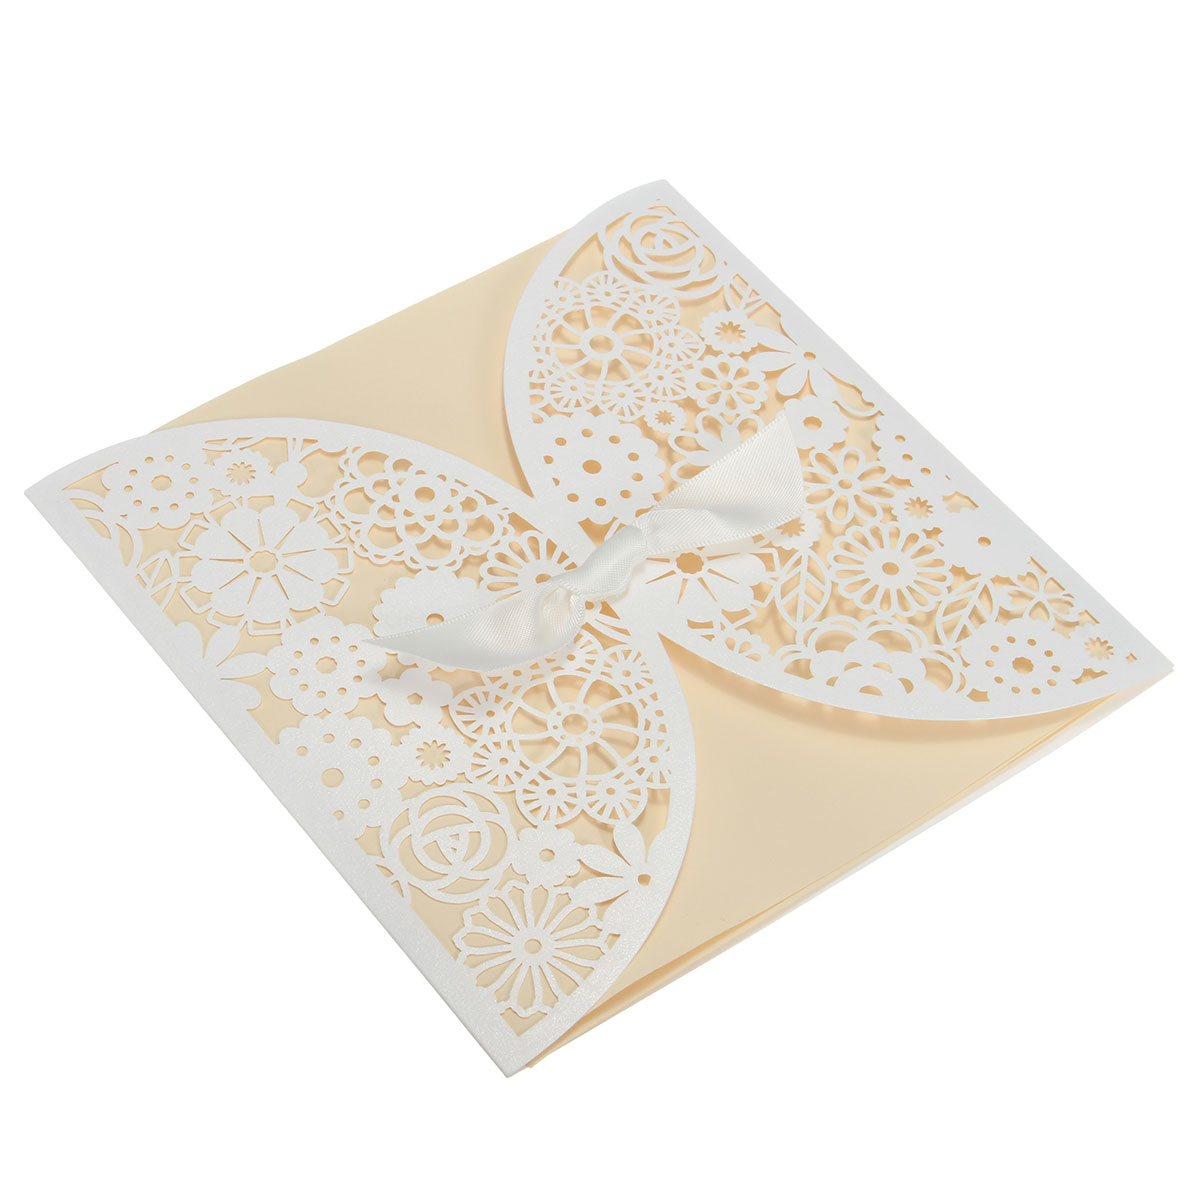 10Pcs-Laser-Cut-Hollow-Out-Bowknot-Wedding-Evening-Invitations-Cards-Personalized-Envelopes-Seals-1058581